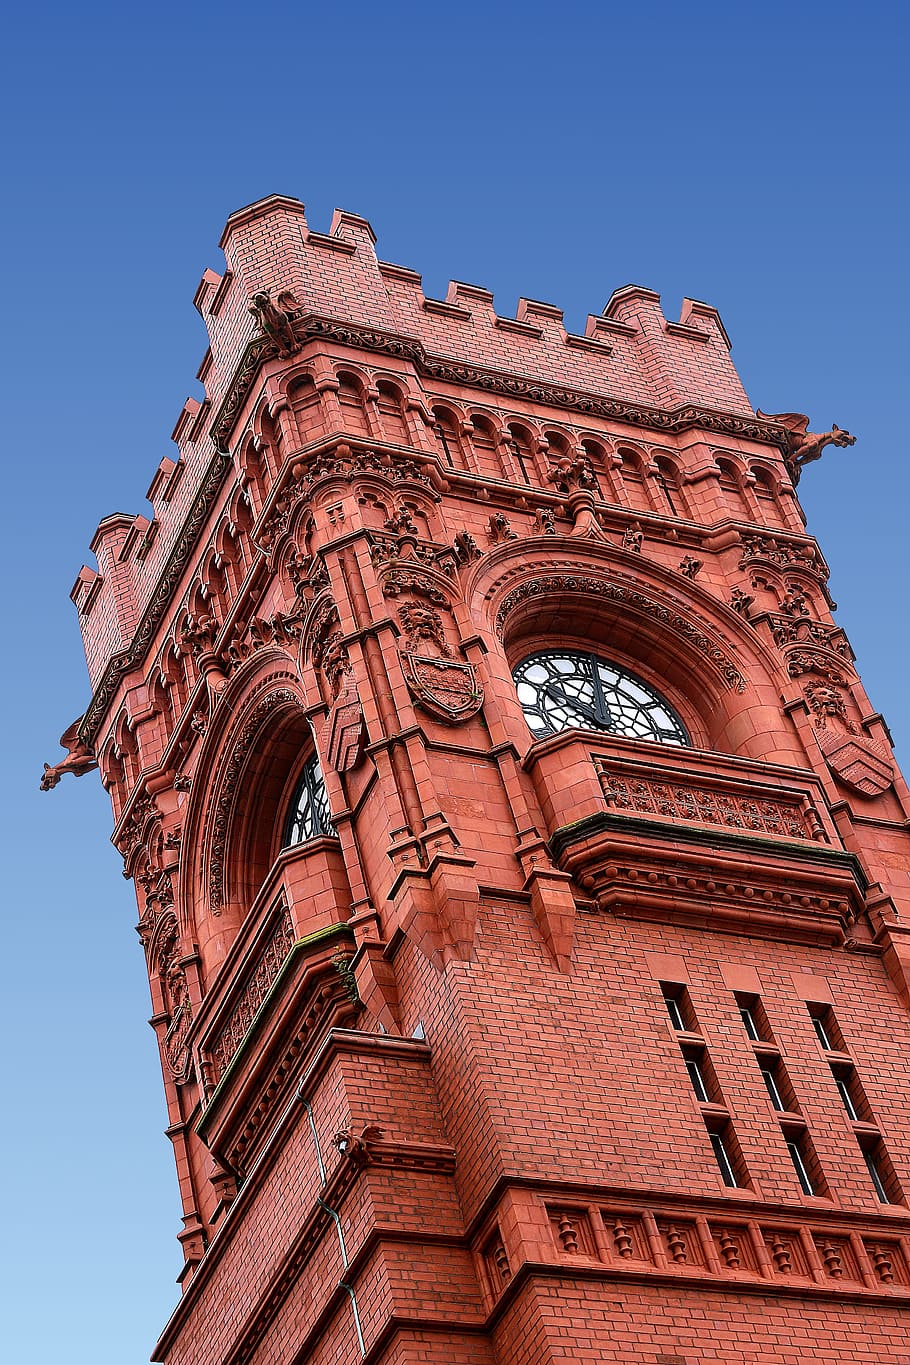 Tower, Building, Clock Tower, Tower, Clock, architecture, exterior